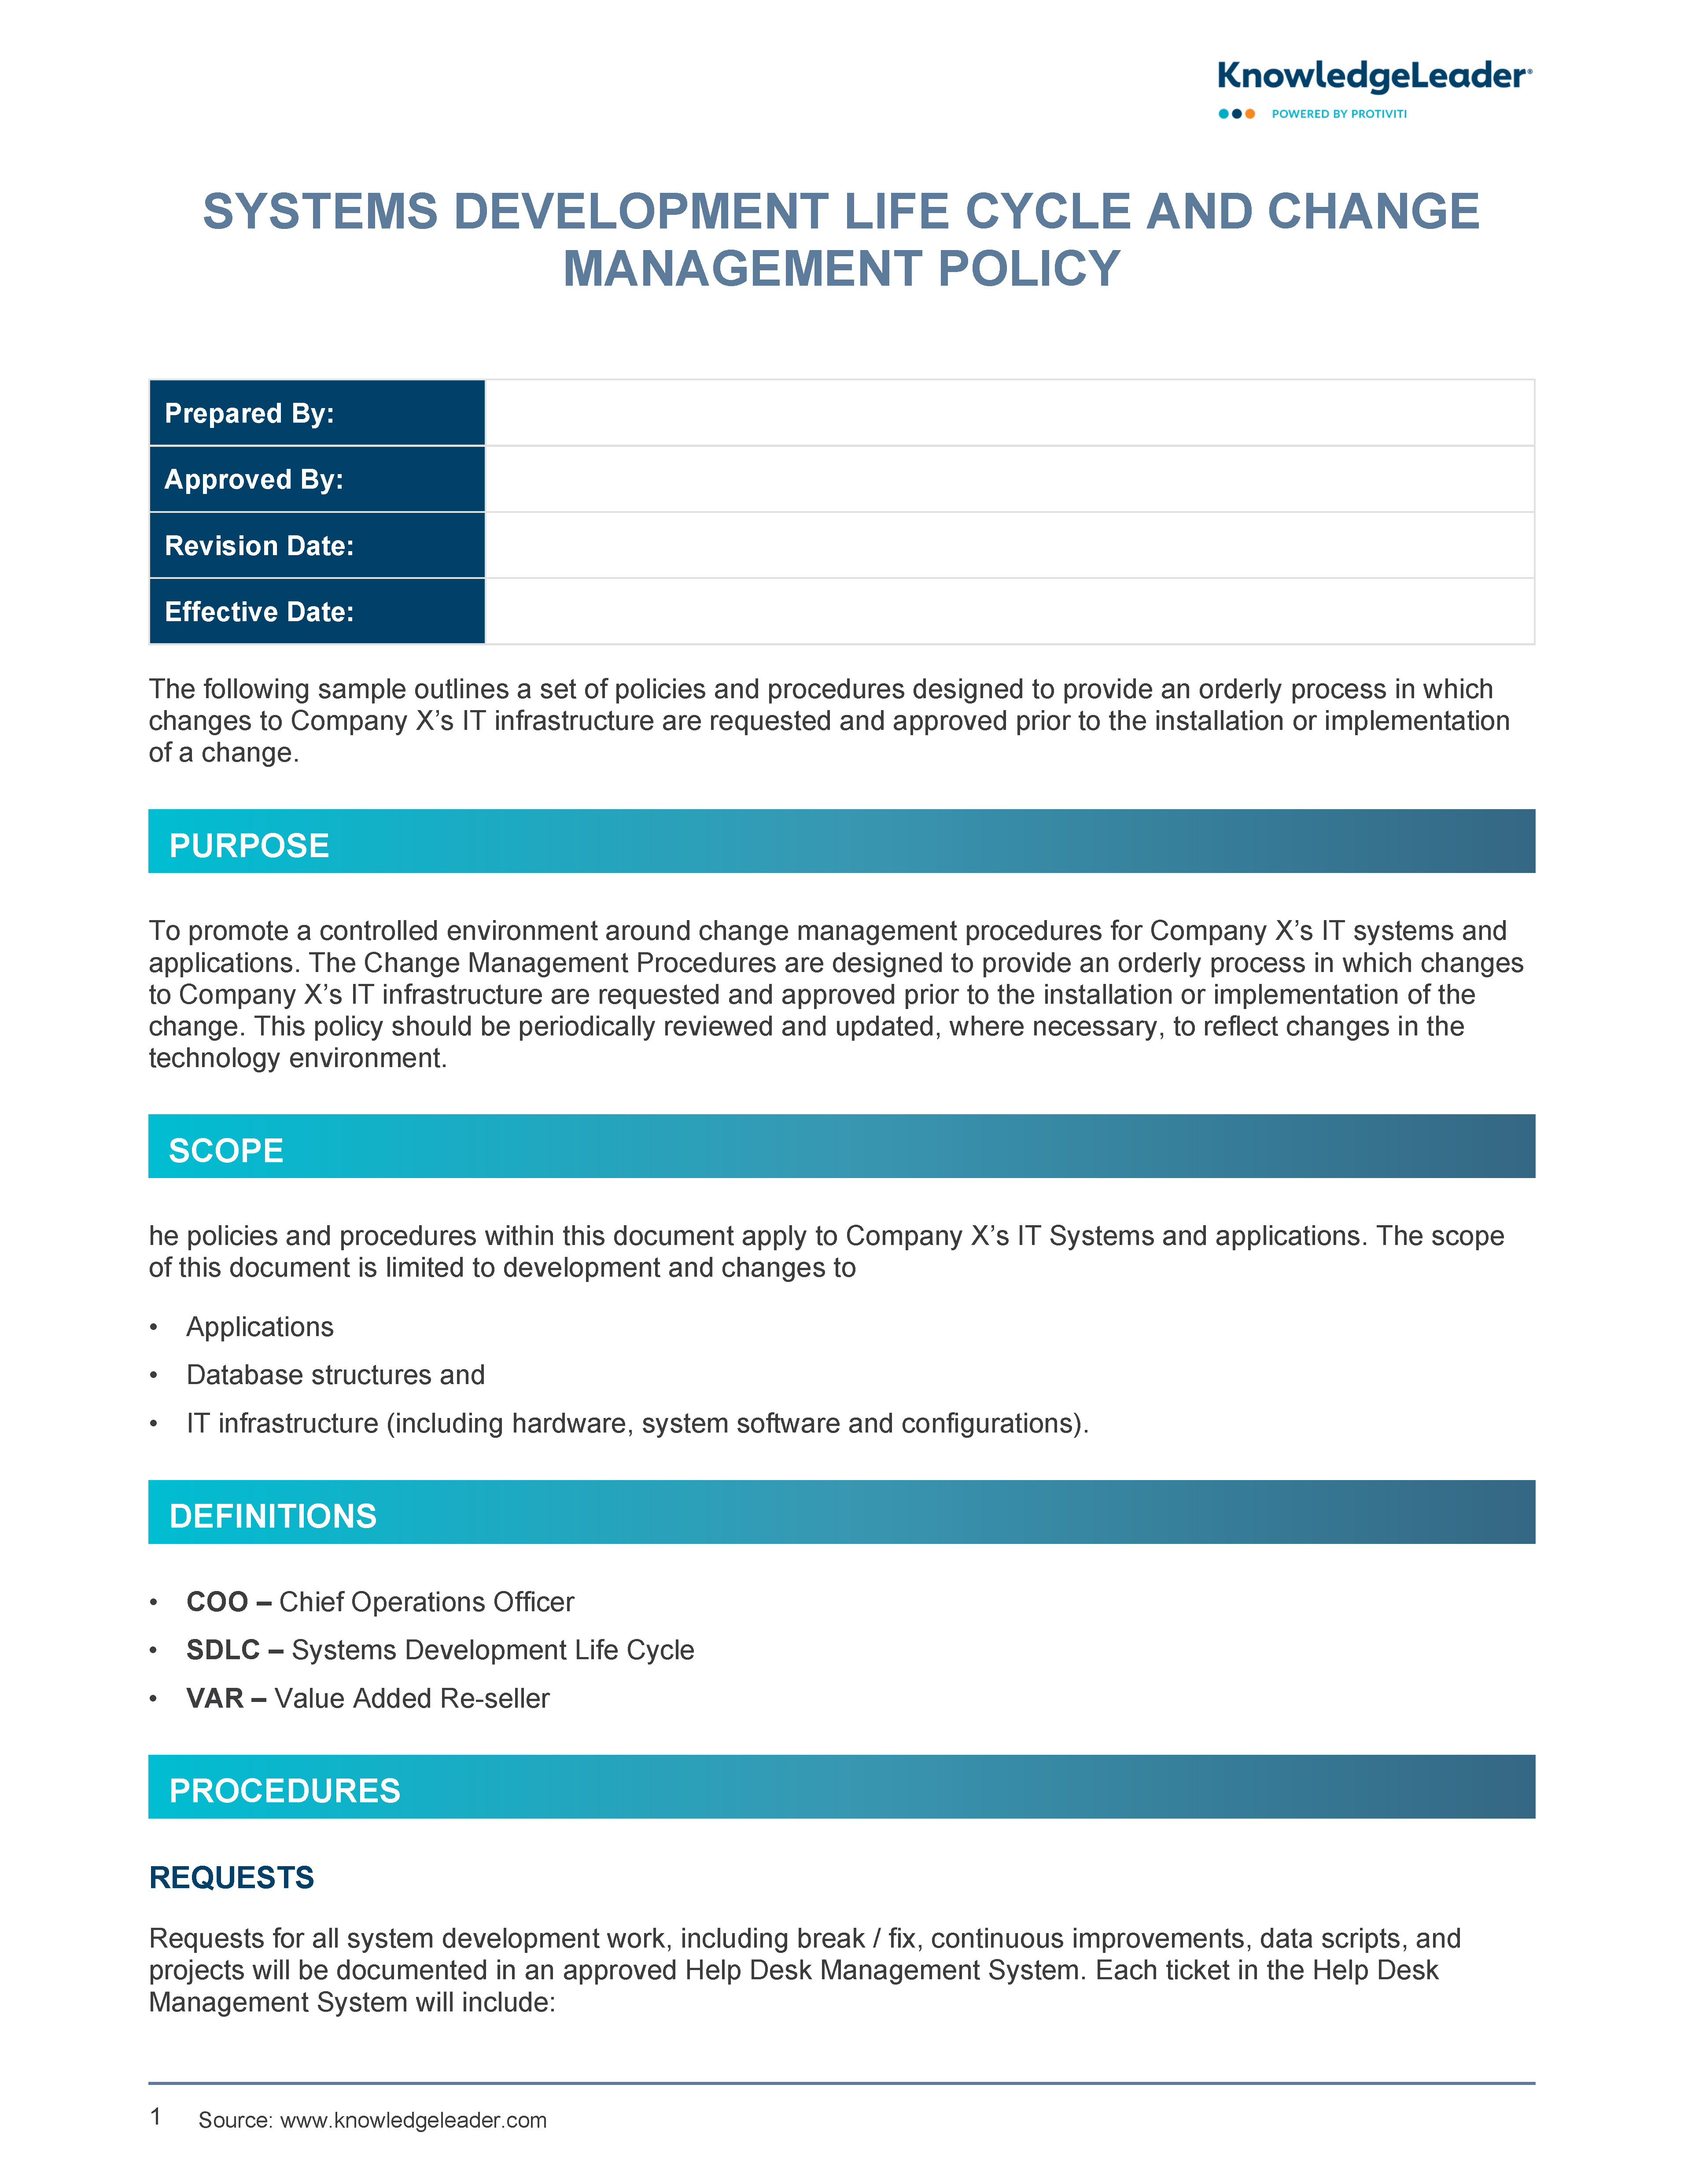 Screenshot of the first page of System Development Life Cycle and Change Management Policy